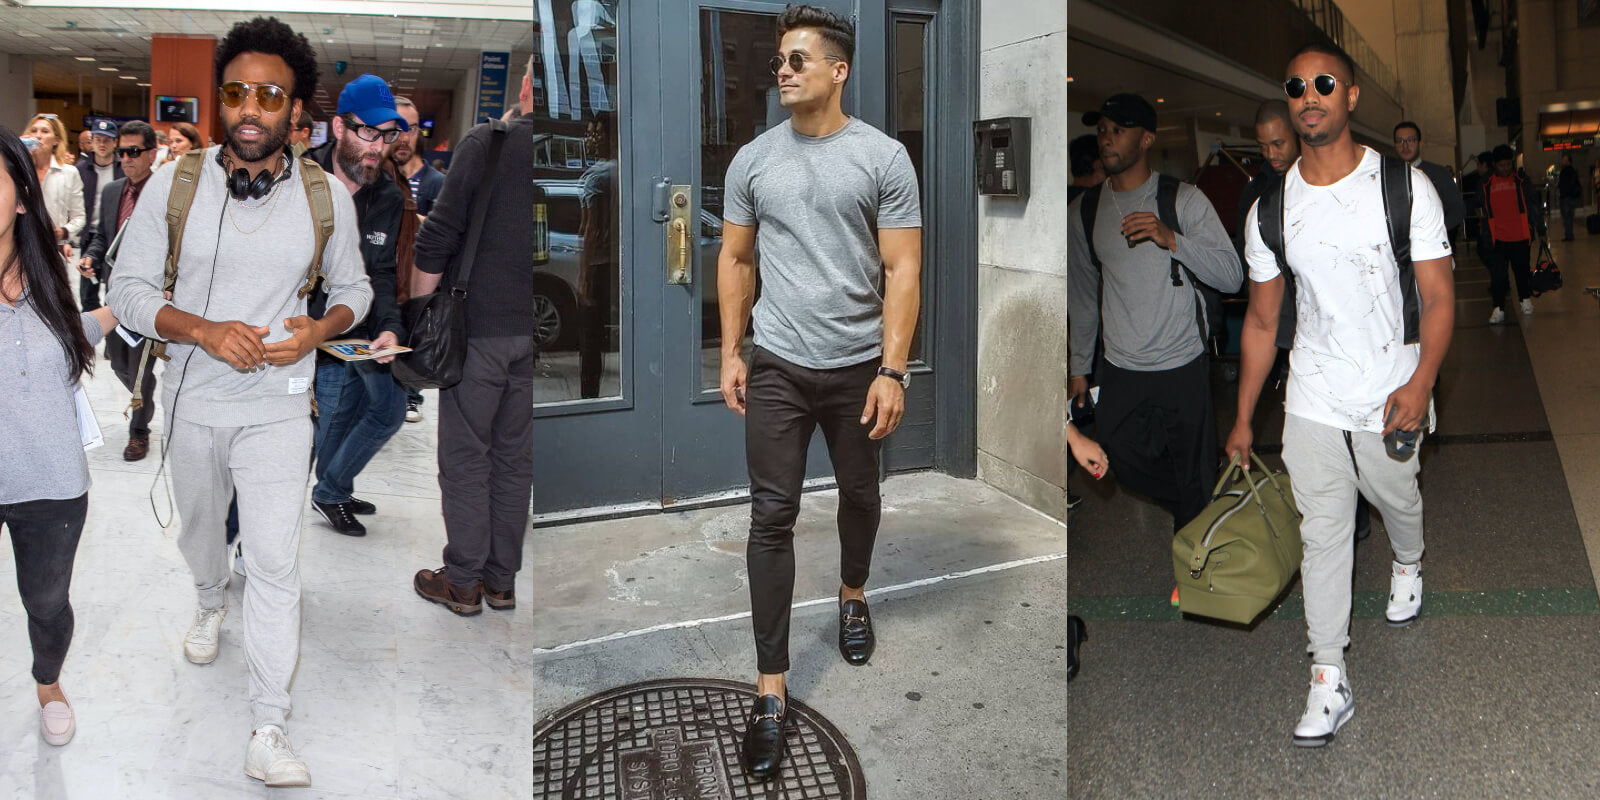 The Best Airport Outfits for Men - Marc Nolan